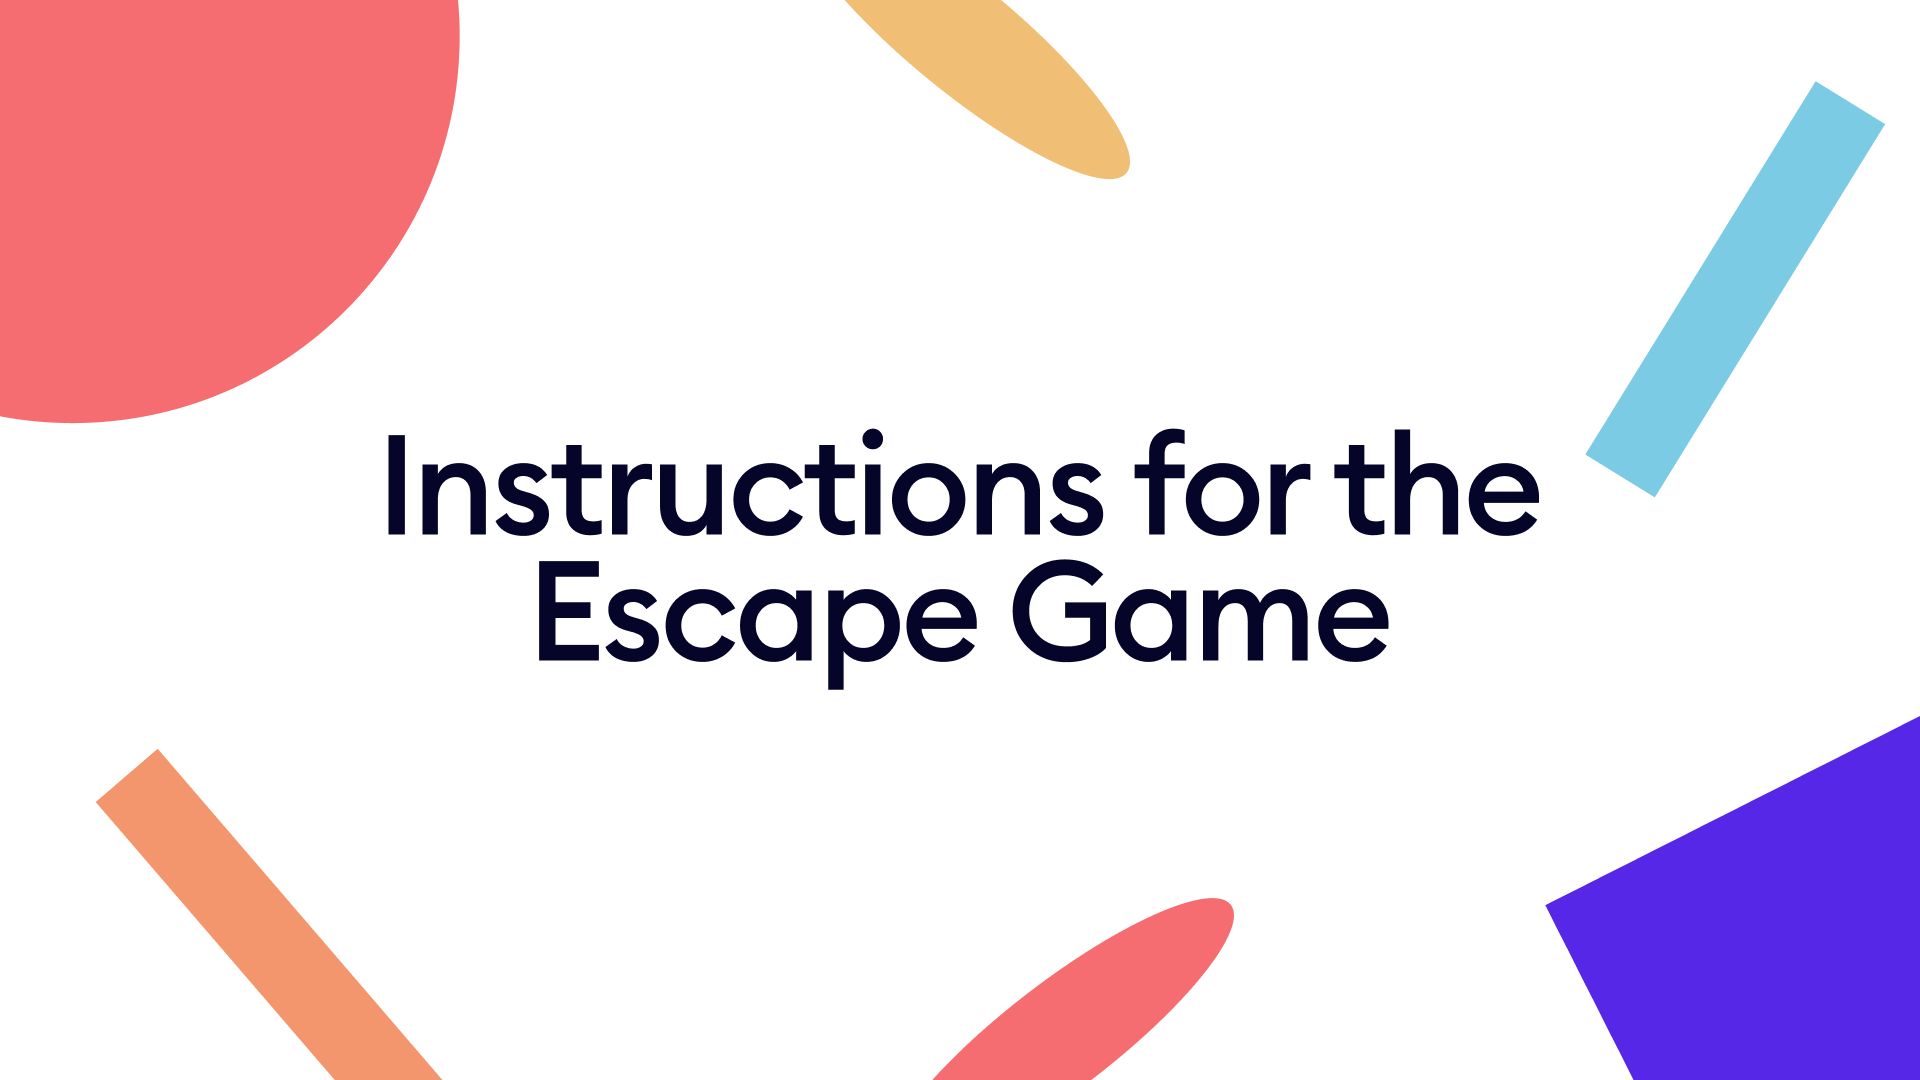 Instructions for the Escape Game